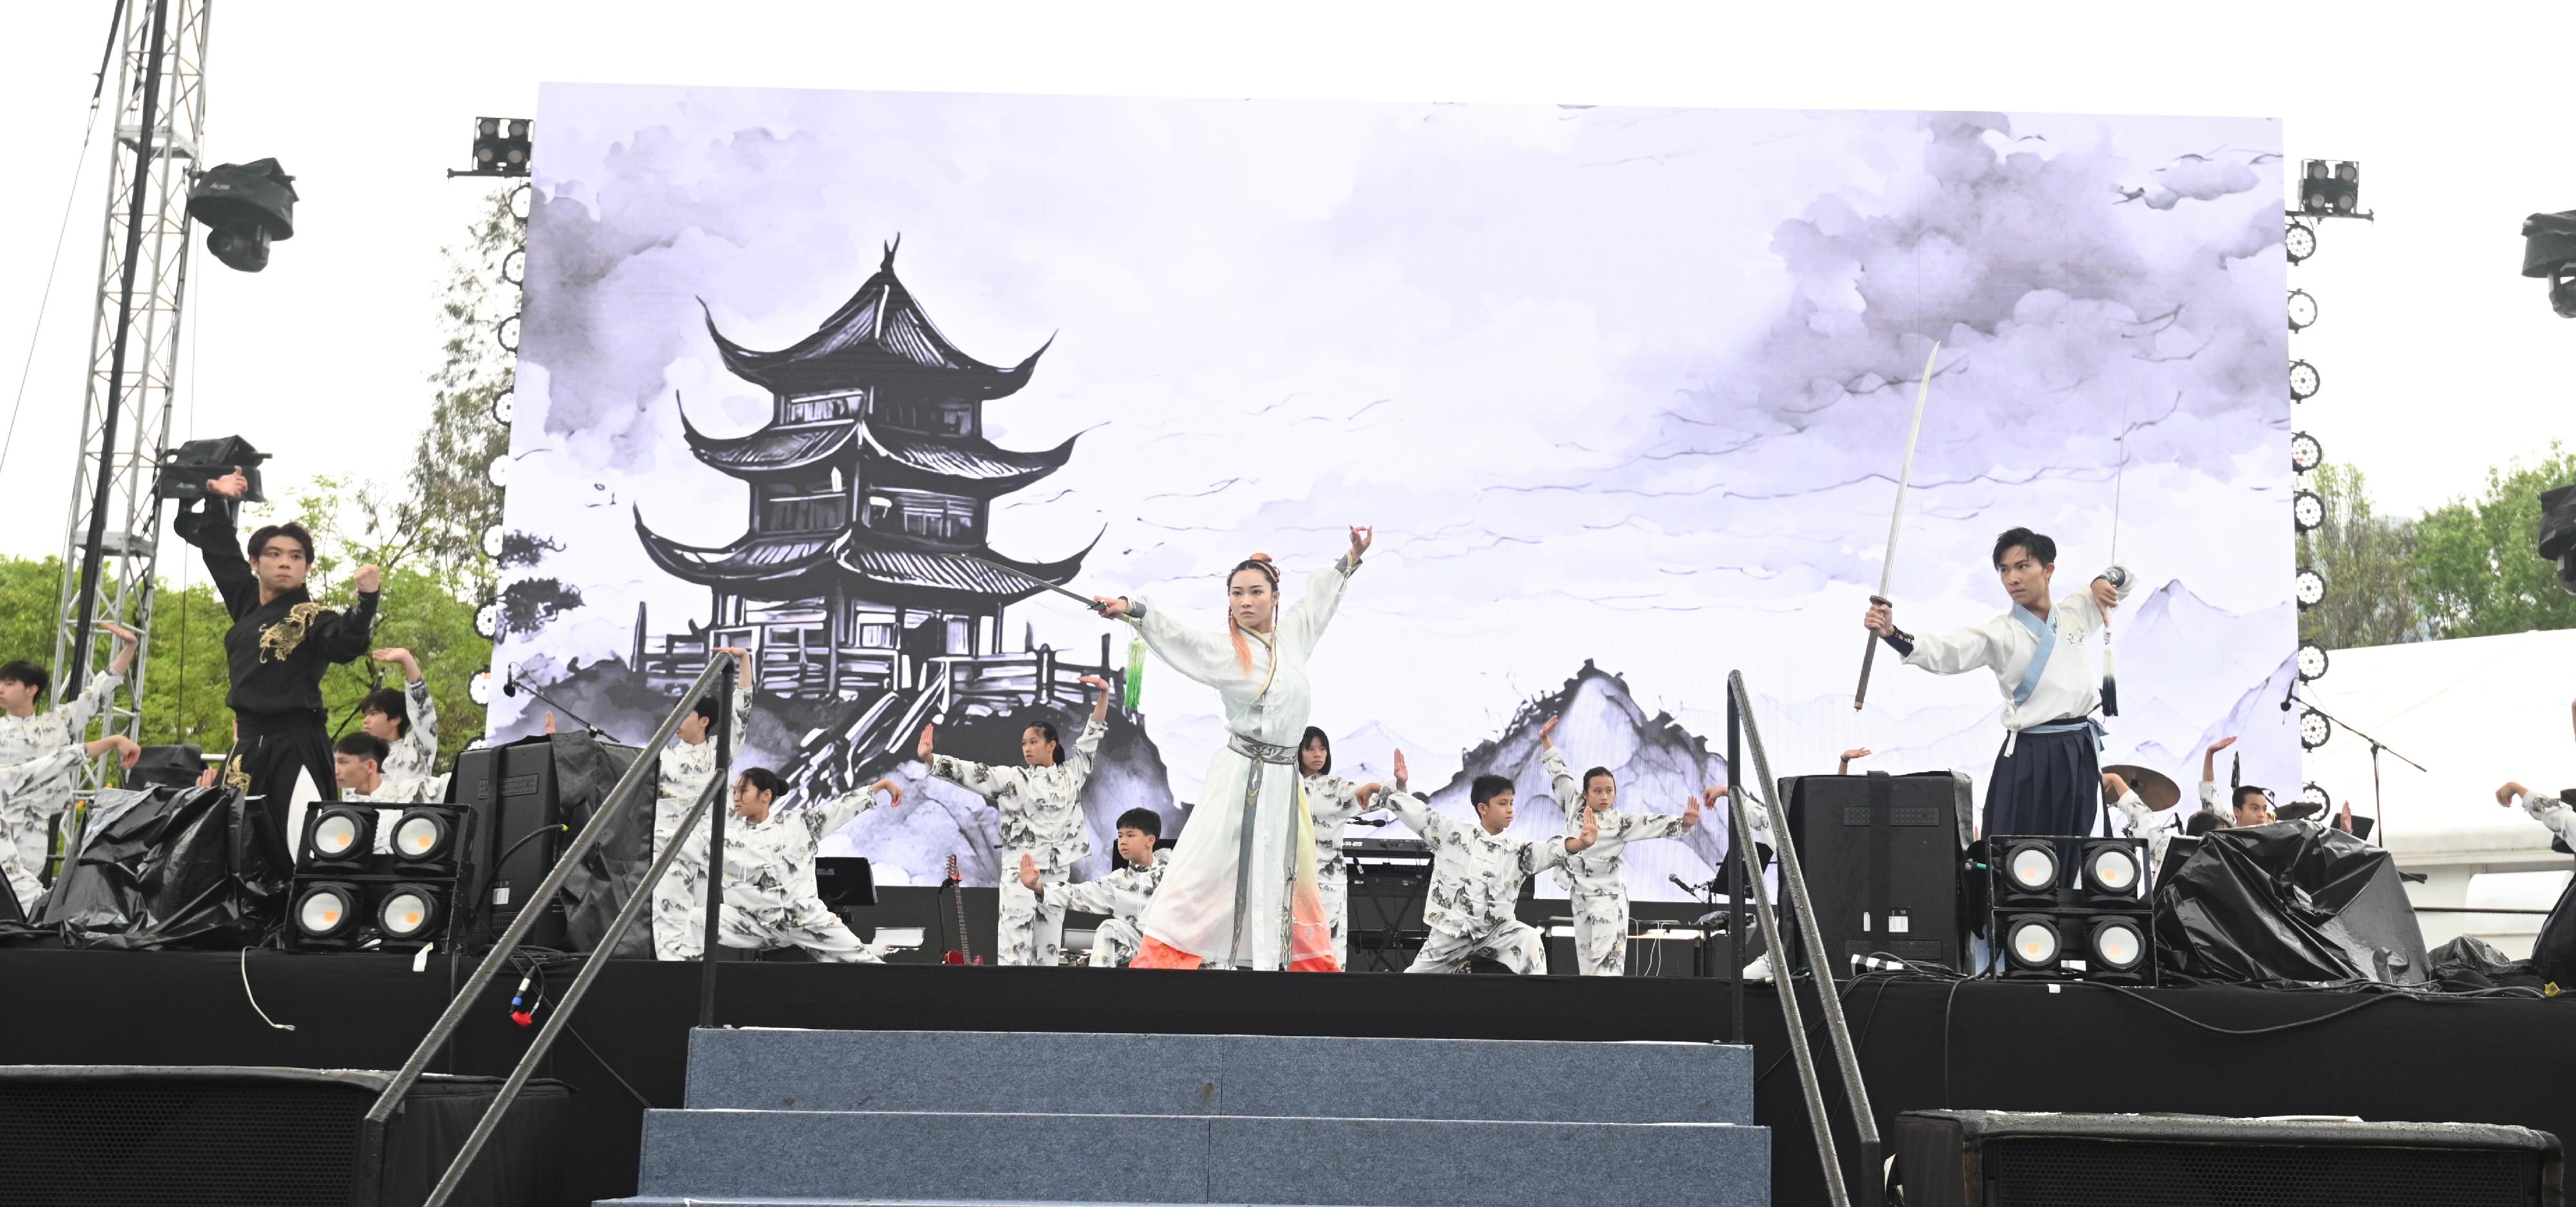 The second Hong Kong Pop Culture Festival opens today (April 6) at the central lawn of Victoria Park. Photo shows martial arts athletes (front row, from left) Lau Chi-lung, Lydia Sham and Samuei Hui turning themselves into martial heroes from Jin Yong's novels, demonstrating their skills together with other young talents in front of an LED comics backdrop.